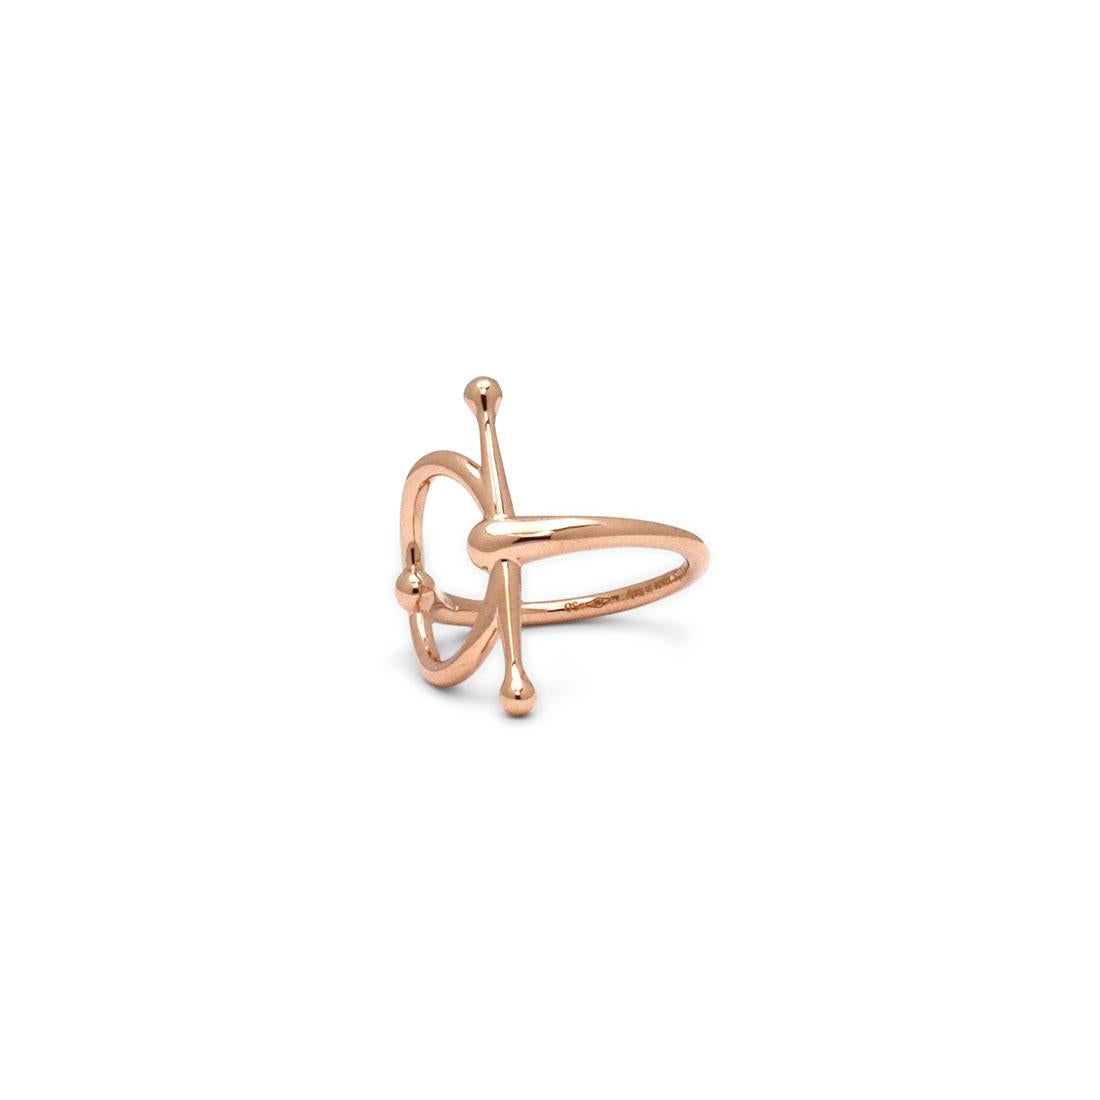 Authentic Hermes Filet d'Or ring crafted in 18 karat rose gold is designed as a tribute, and to resemble, equestrian buckles. Ring size 50 (US 5 1/4). Signed Hermes, Au750, Made in Italy, with serial number and hallmarks. This ring is not presented